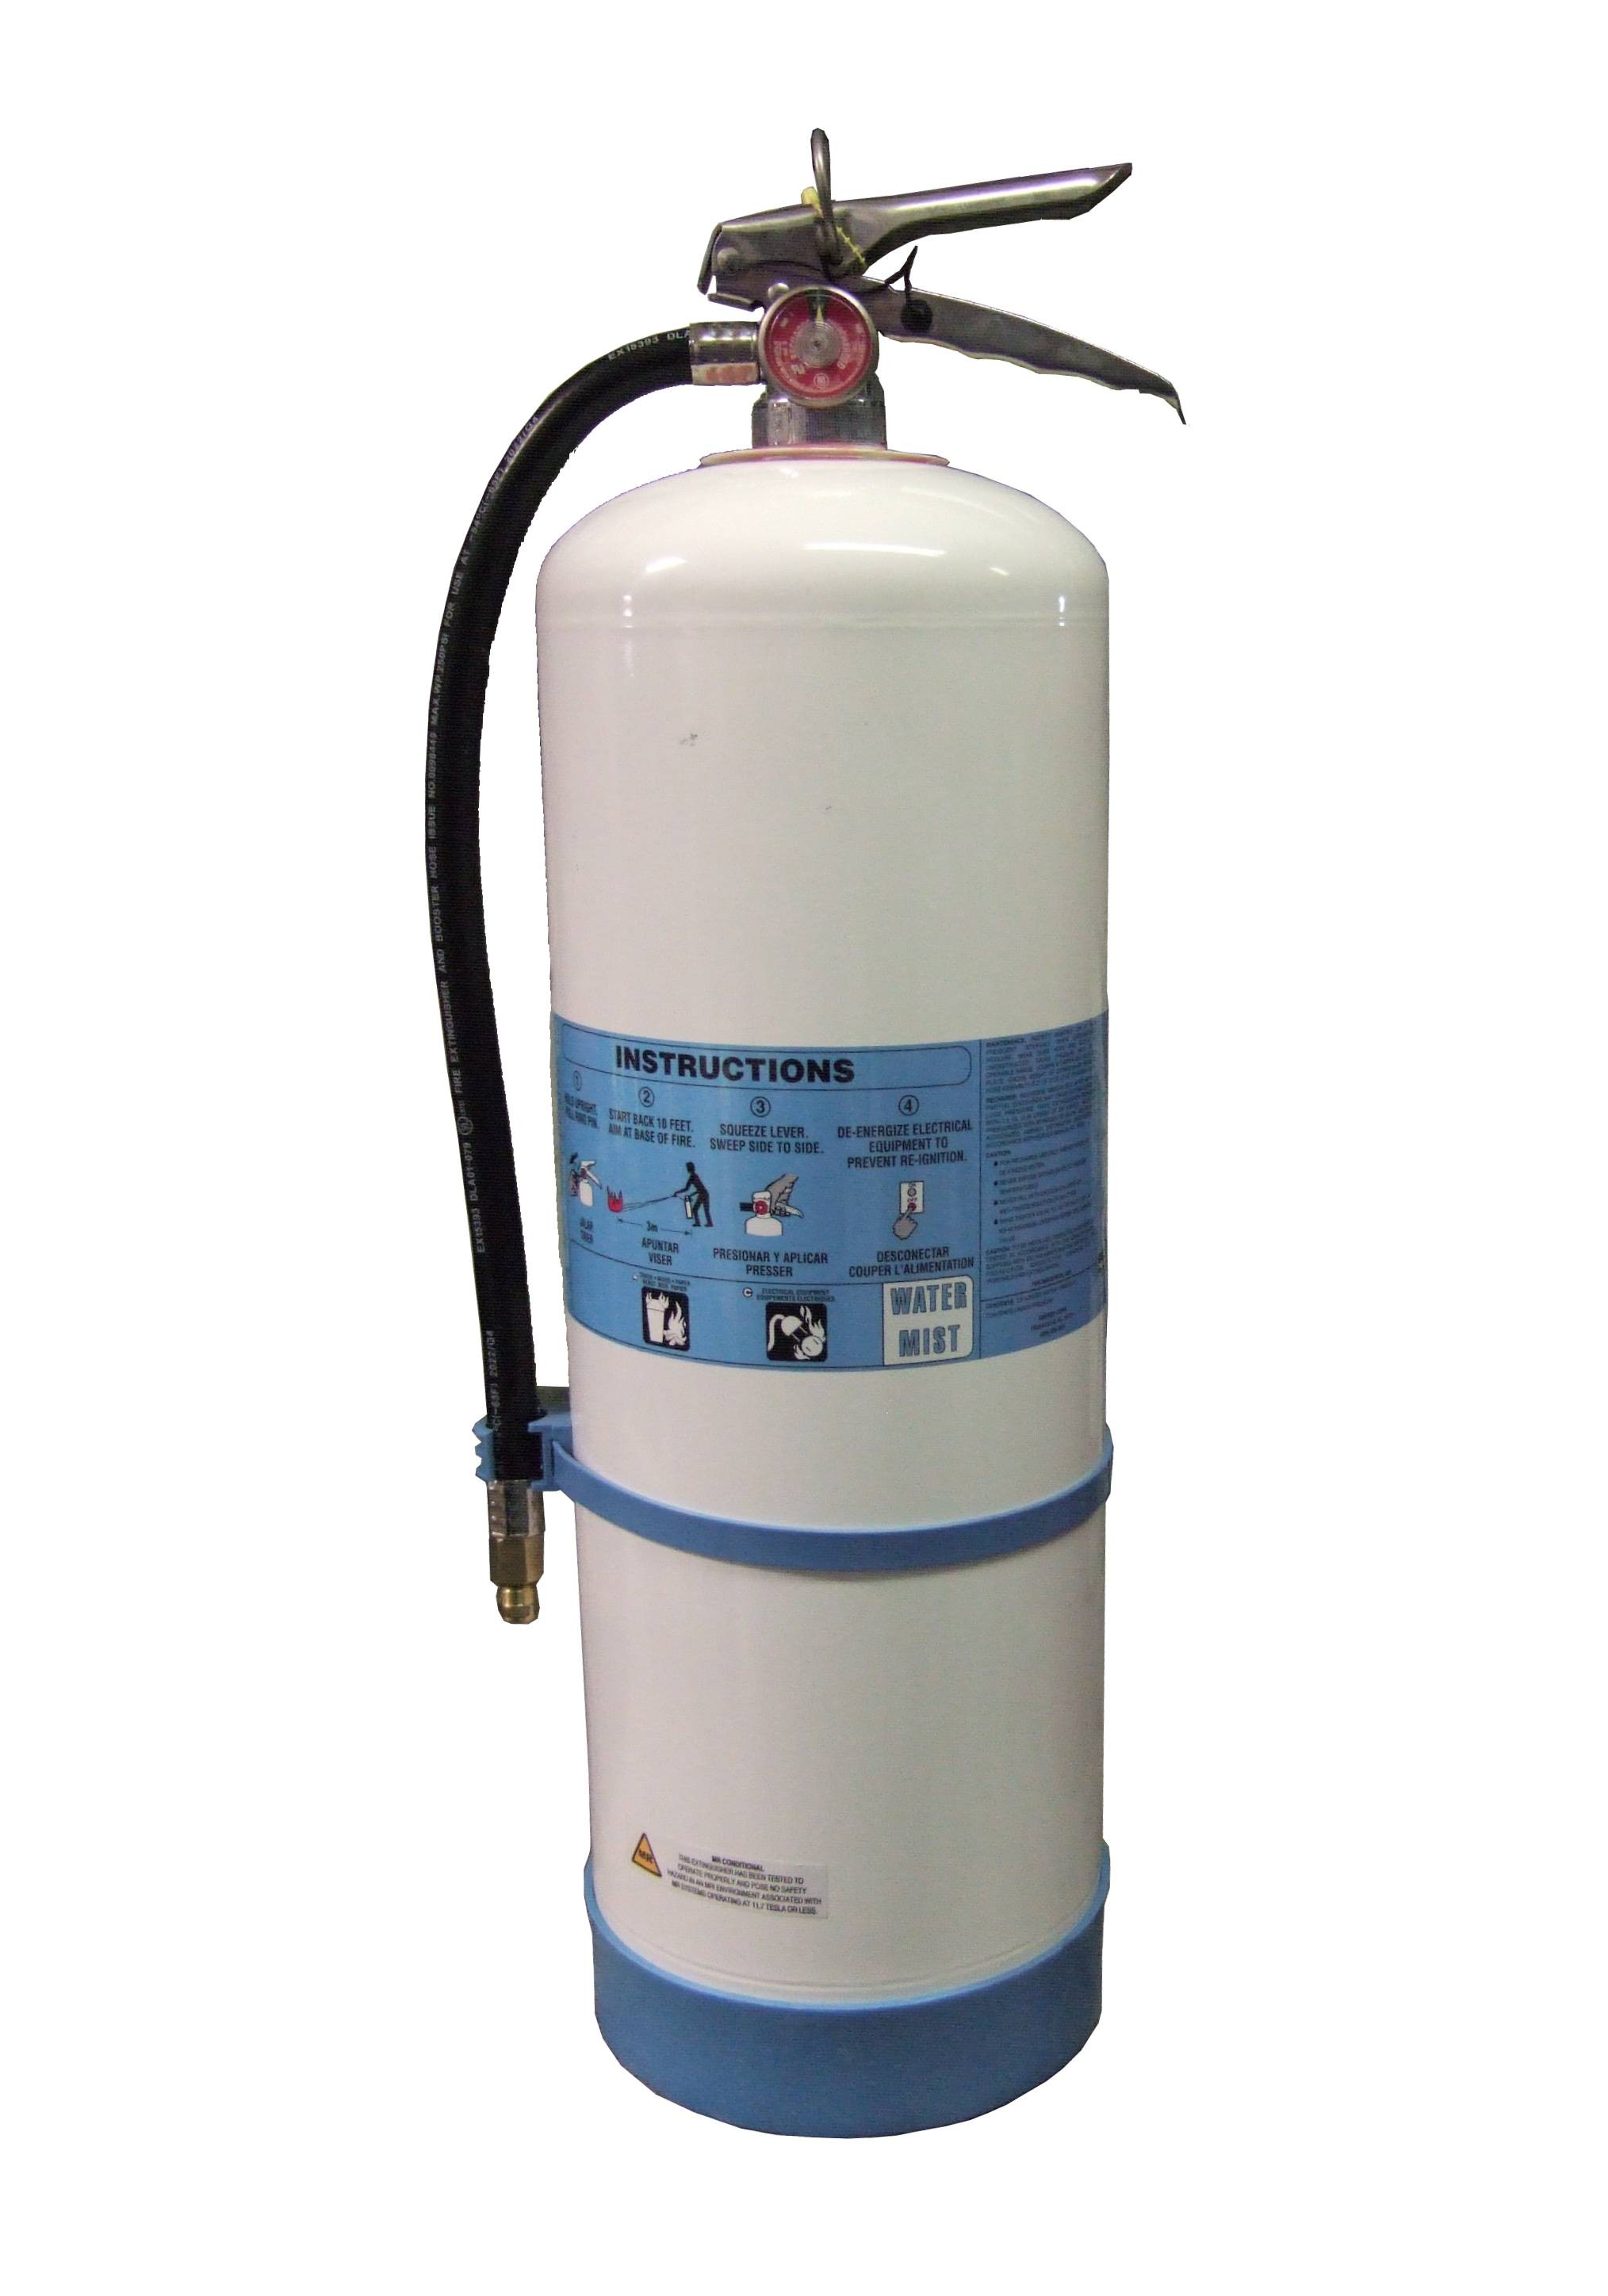 Portable fire extinguisher with demineralized water 2.5 gallons, type AC,  ULC 2AC, with wall hook.